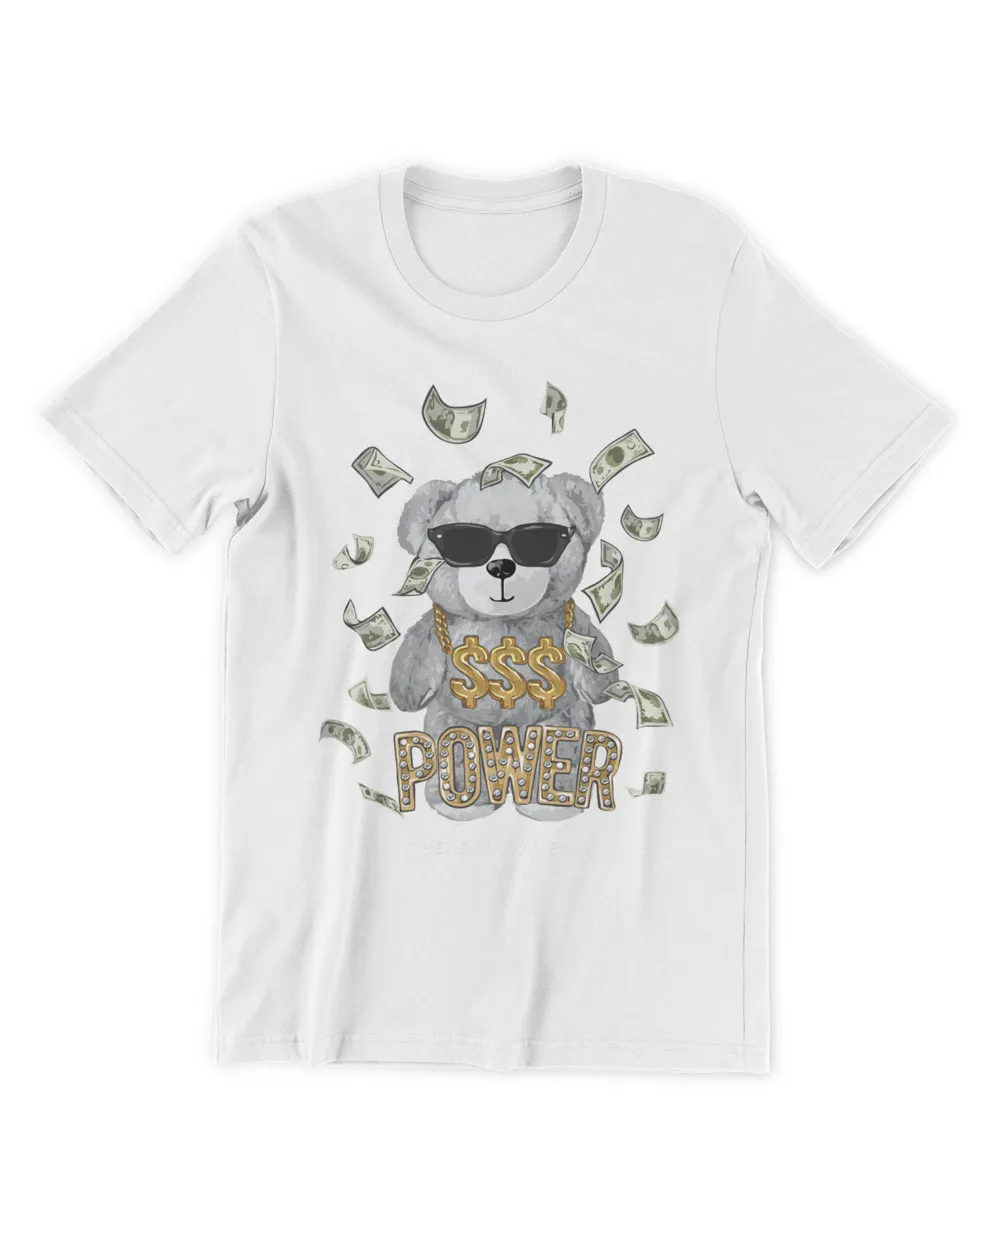 Taking Charge with Money Driving Progress in Life - Money Art T-shirt Maxu